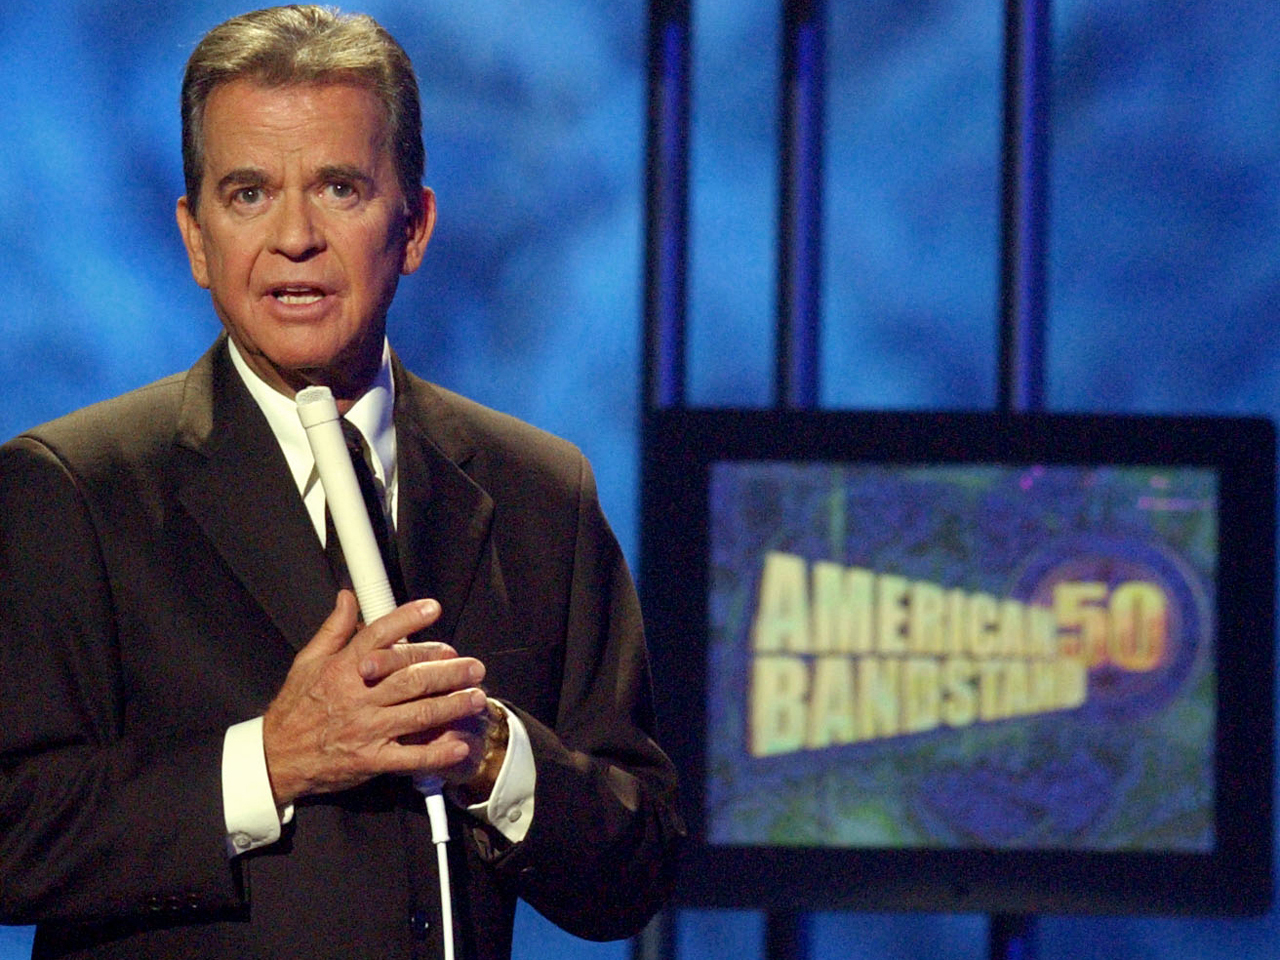 Dick Clark A Timeline Of Career Highlights From American Bandstand And Beyond